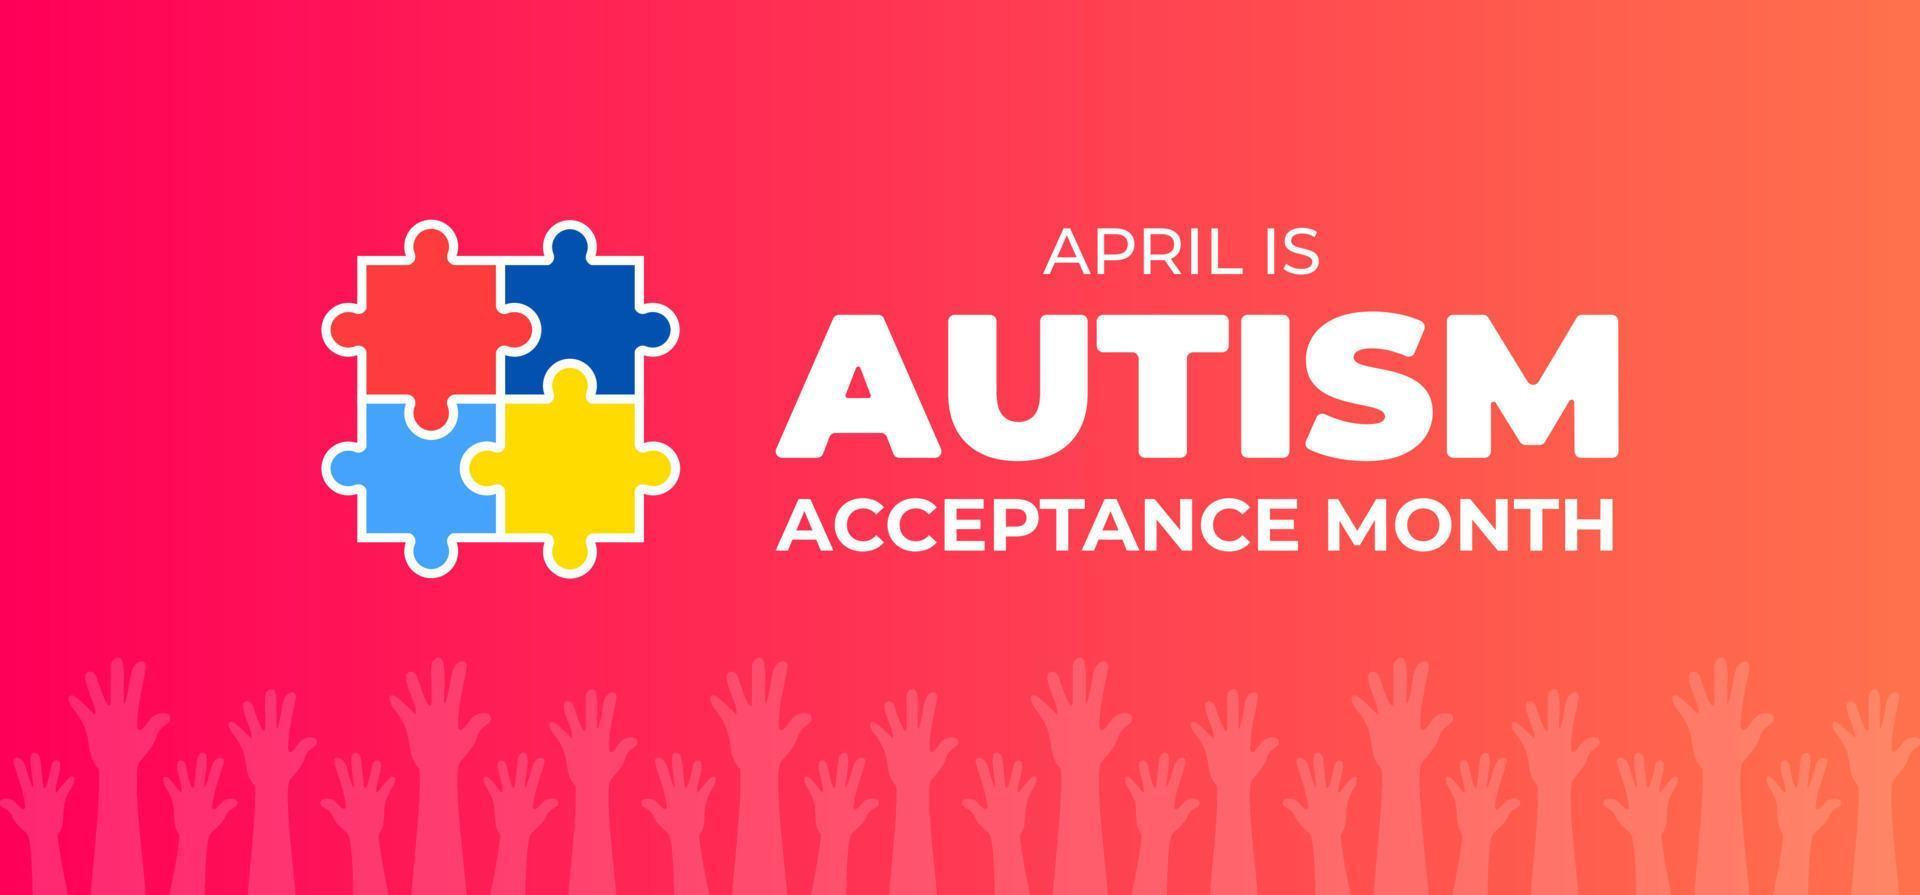 Autism Acceptance Month background or banner design template. vector